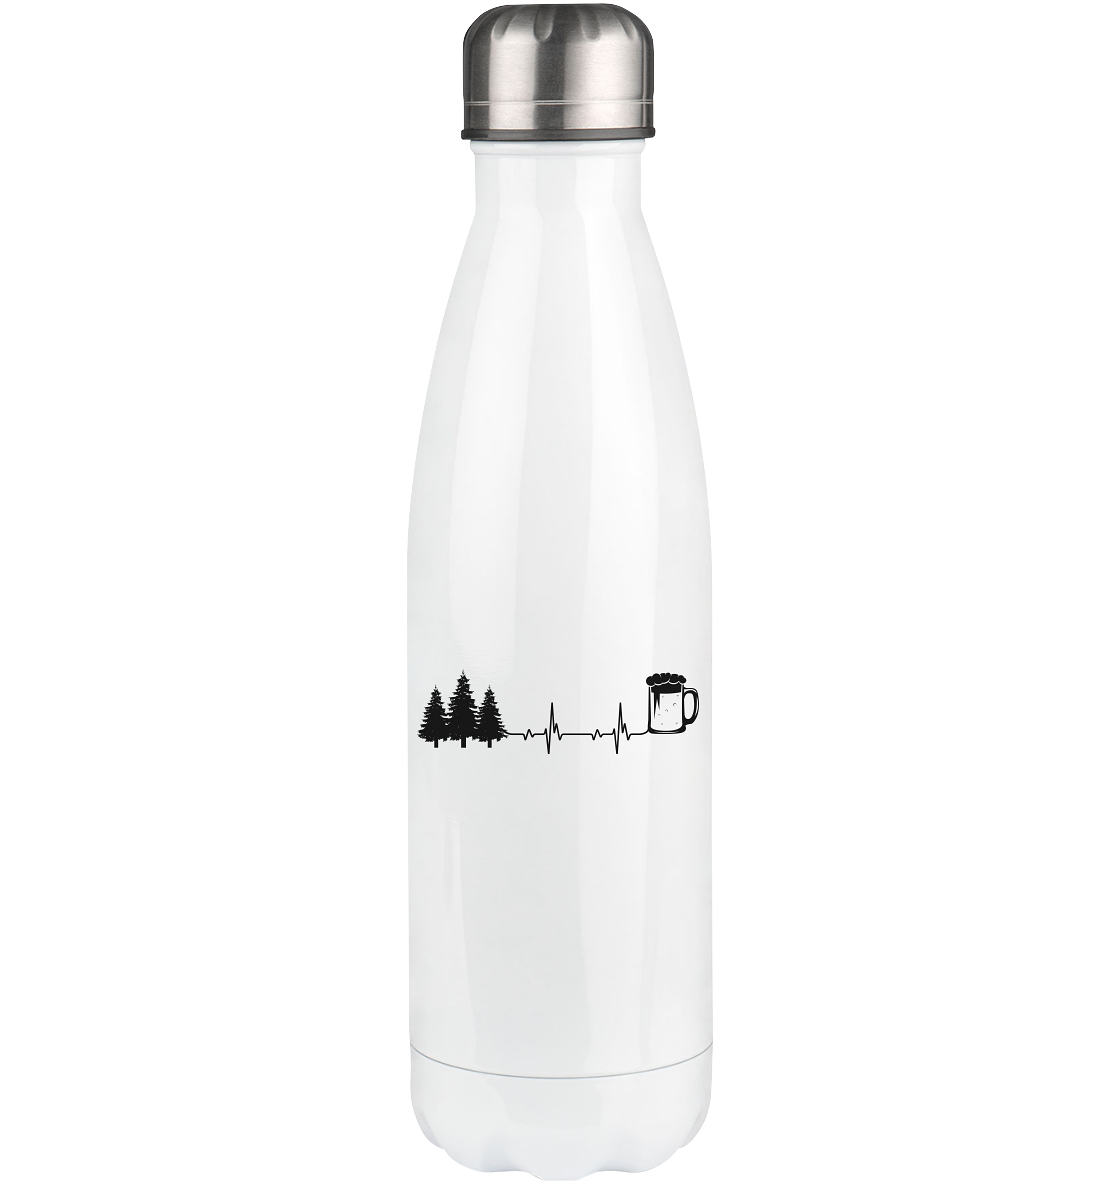 Heartbeat Beer and Trees - Edelstahl Thermosflasche camping UONP 500ml